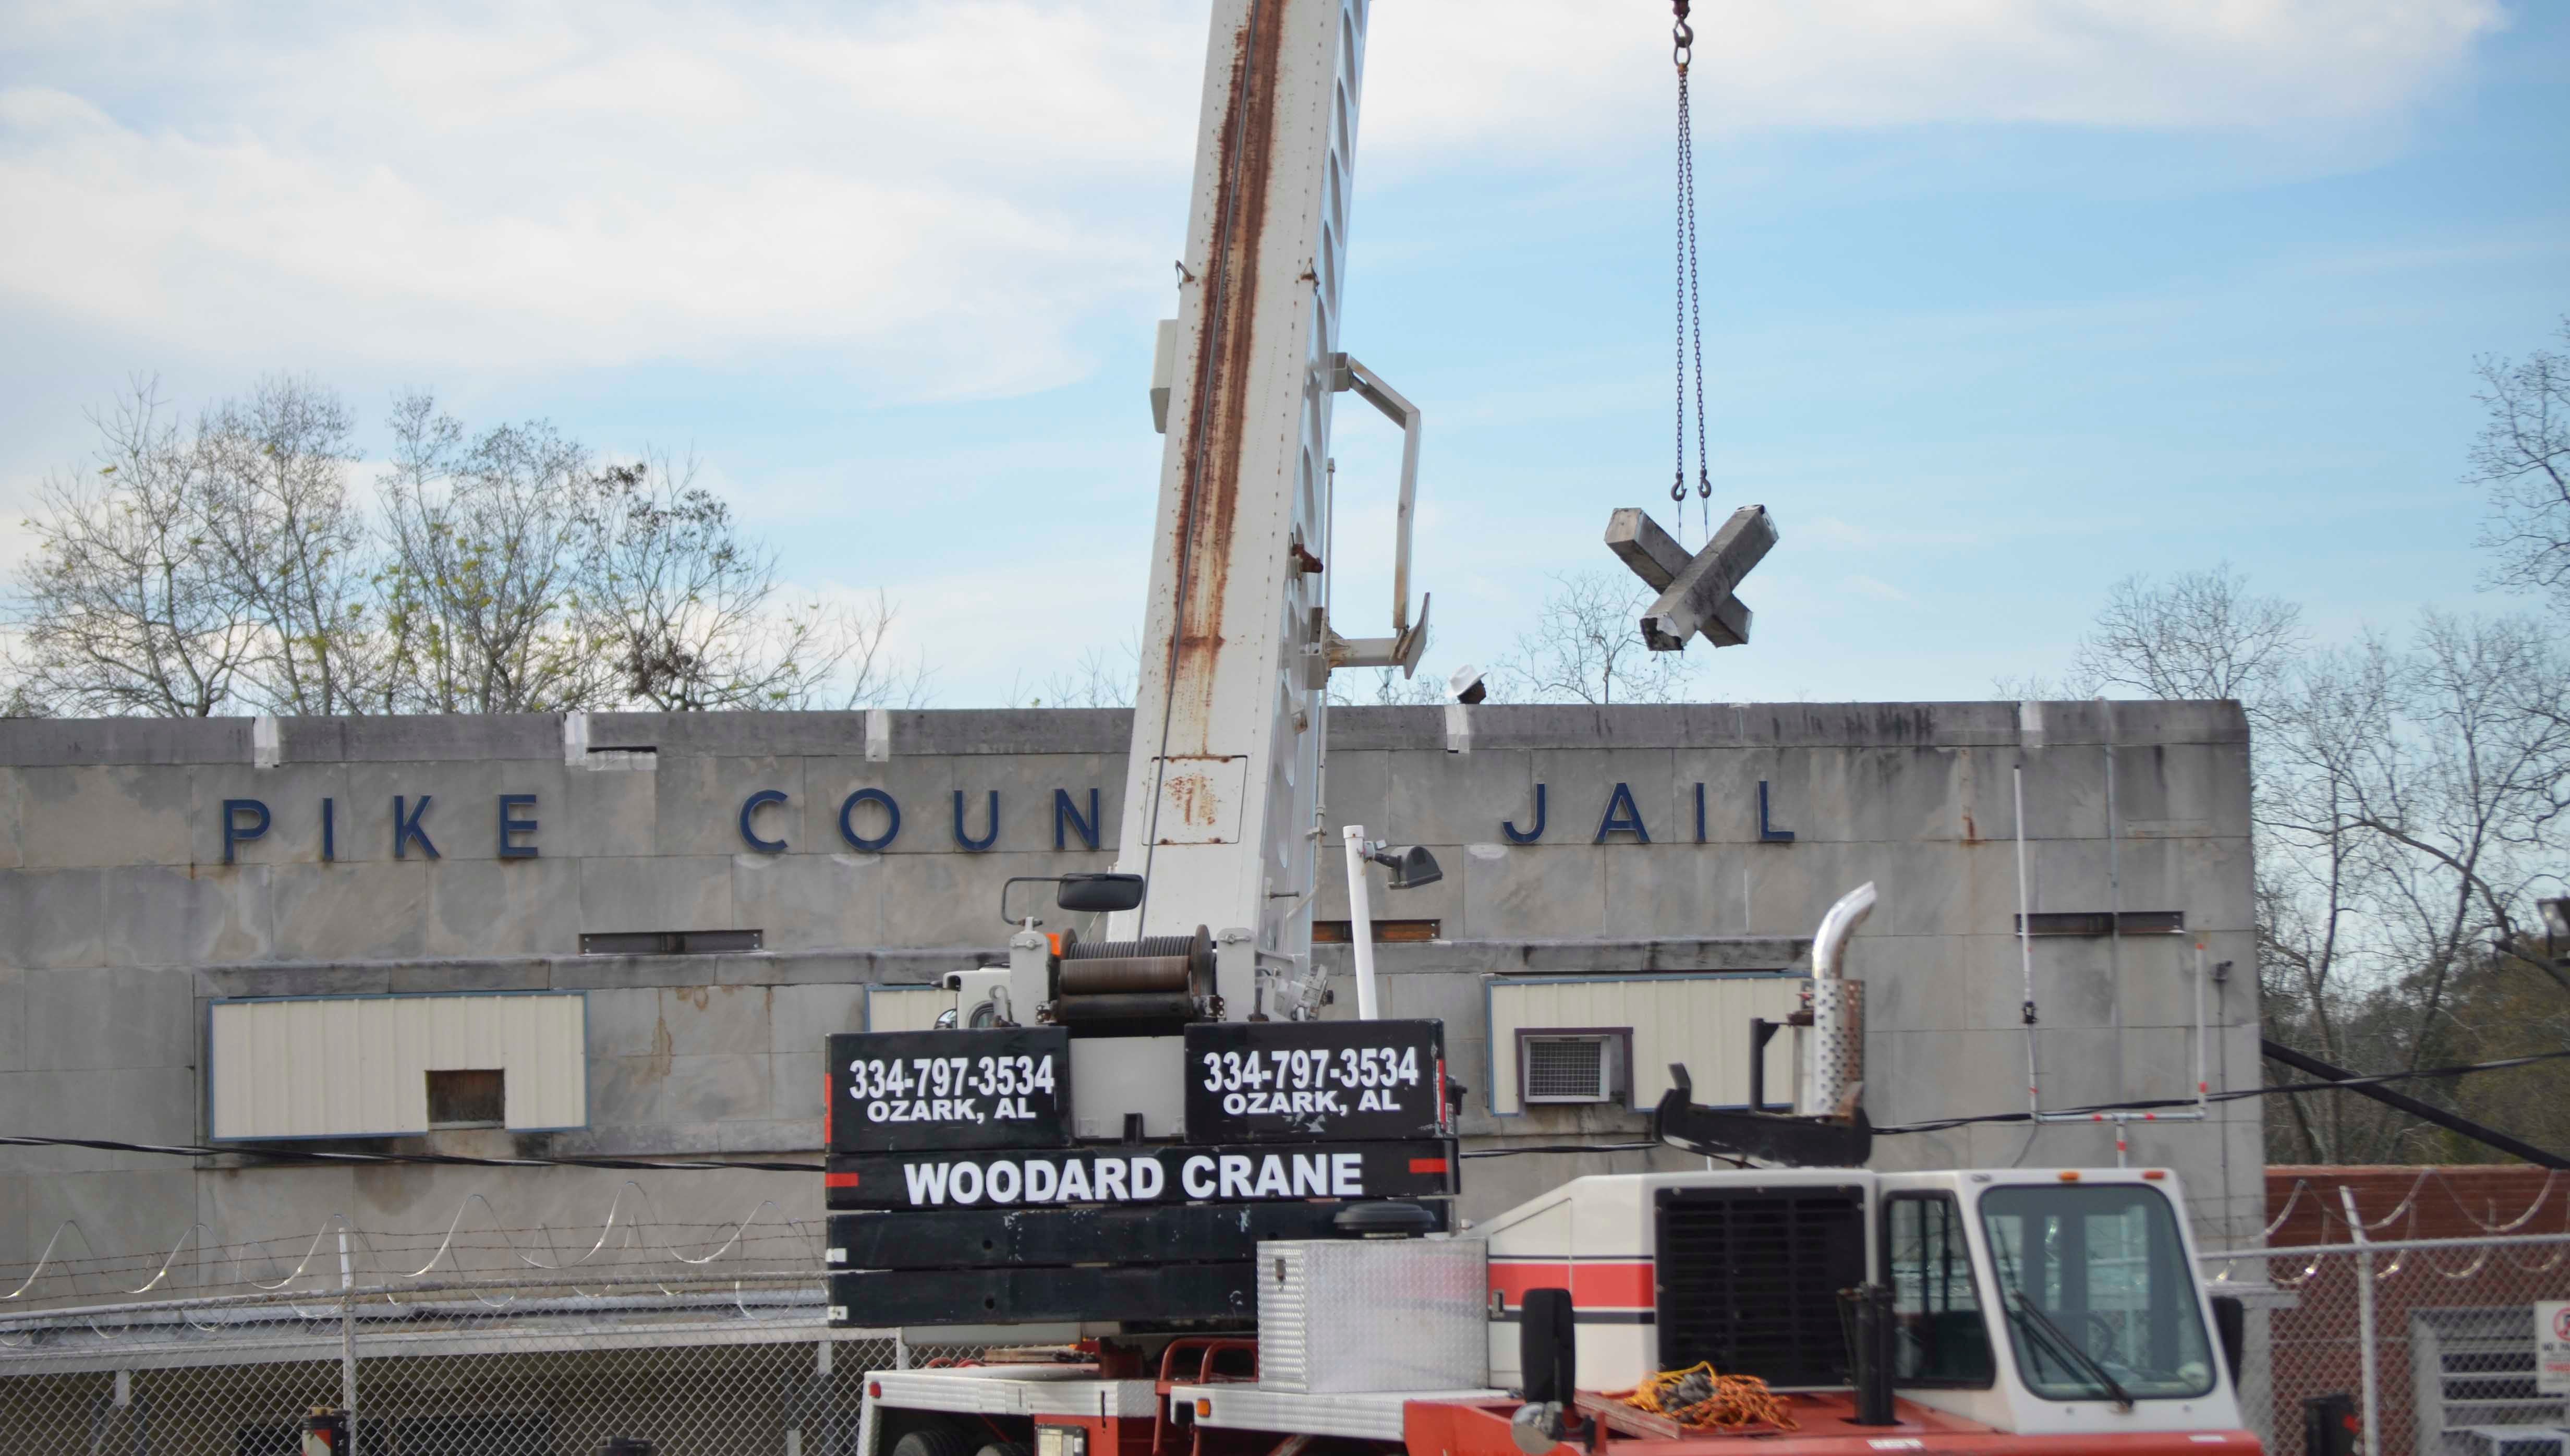 Work is underway at the Pike County Jail, where construction crews are working to shore up the building. County officials say the jail, which was built in 1957, needs to be stablized and made safe while commissioners explore options for constructing a new, modern correctional facility.